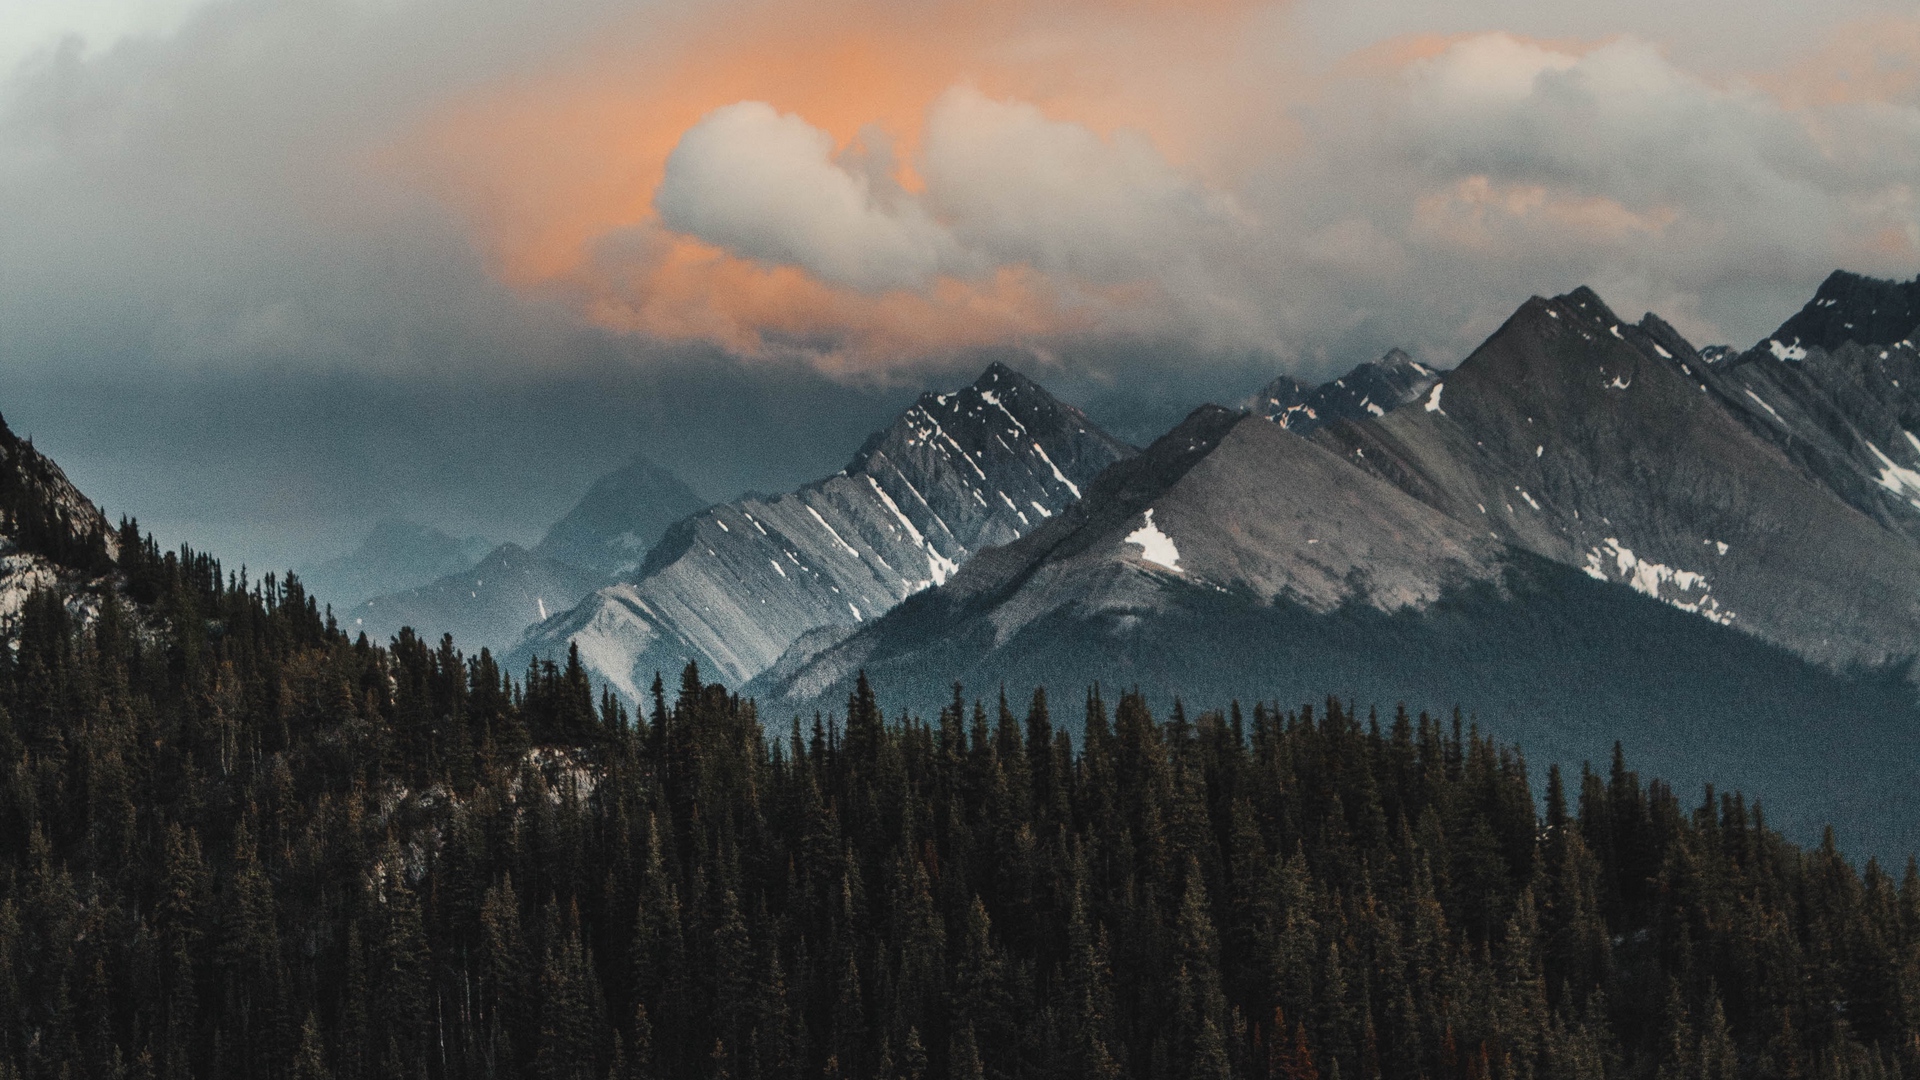 Download wallpaper 1920x1080 mountains forest clouds mountain